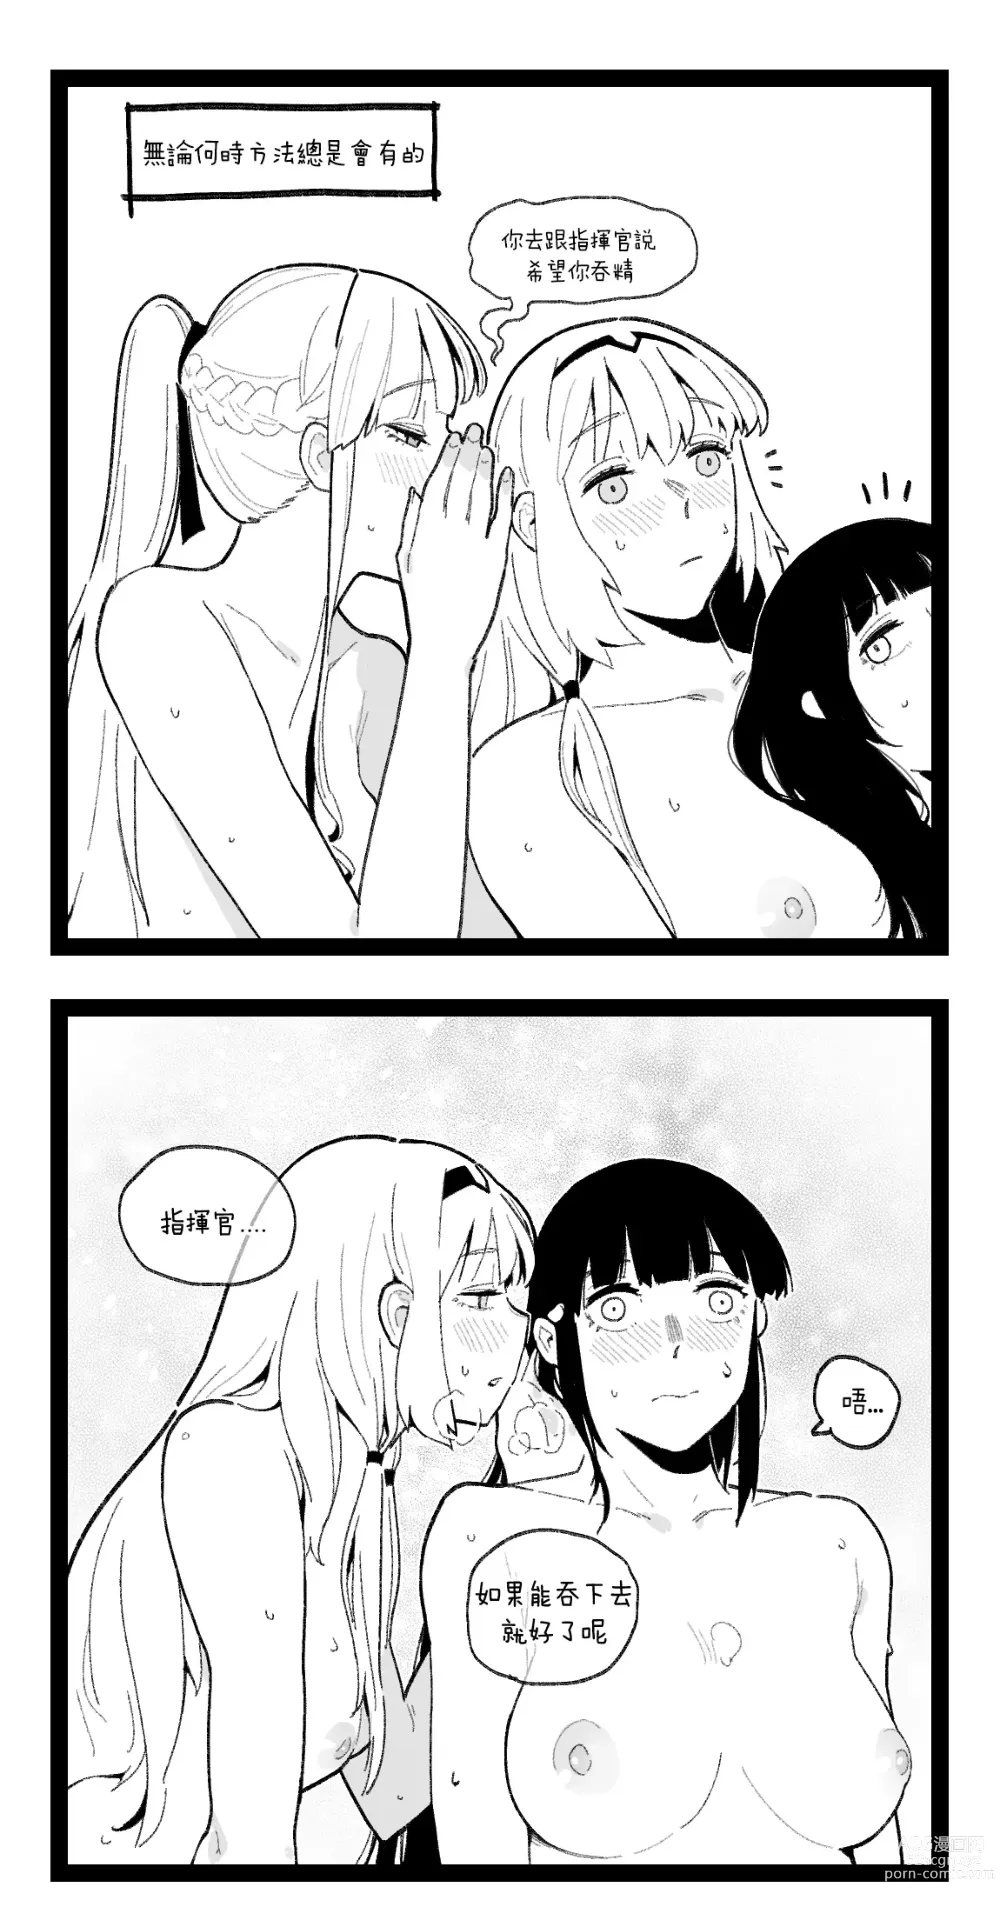 Page 42 of doujinshi valentine day part1-2 + SCR (decensored)